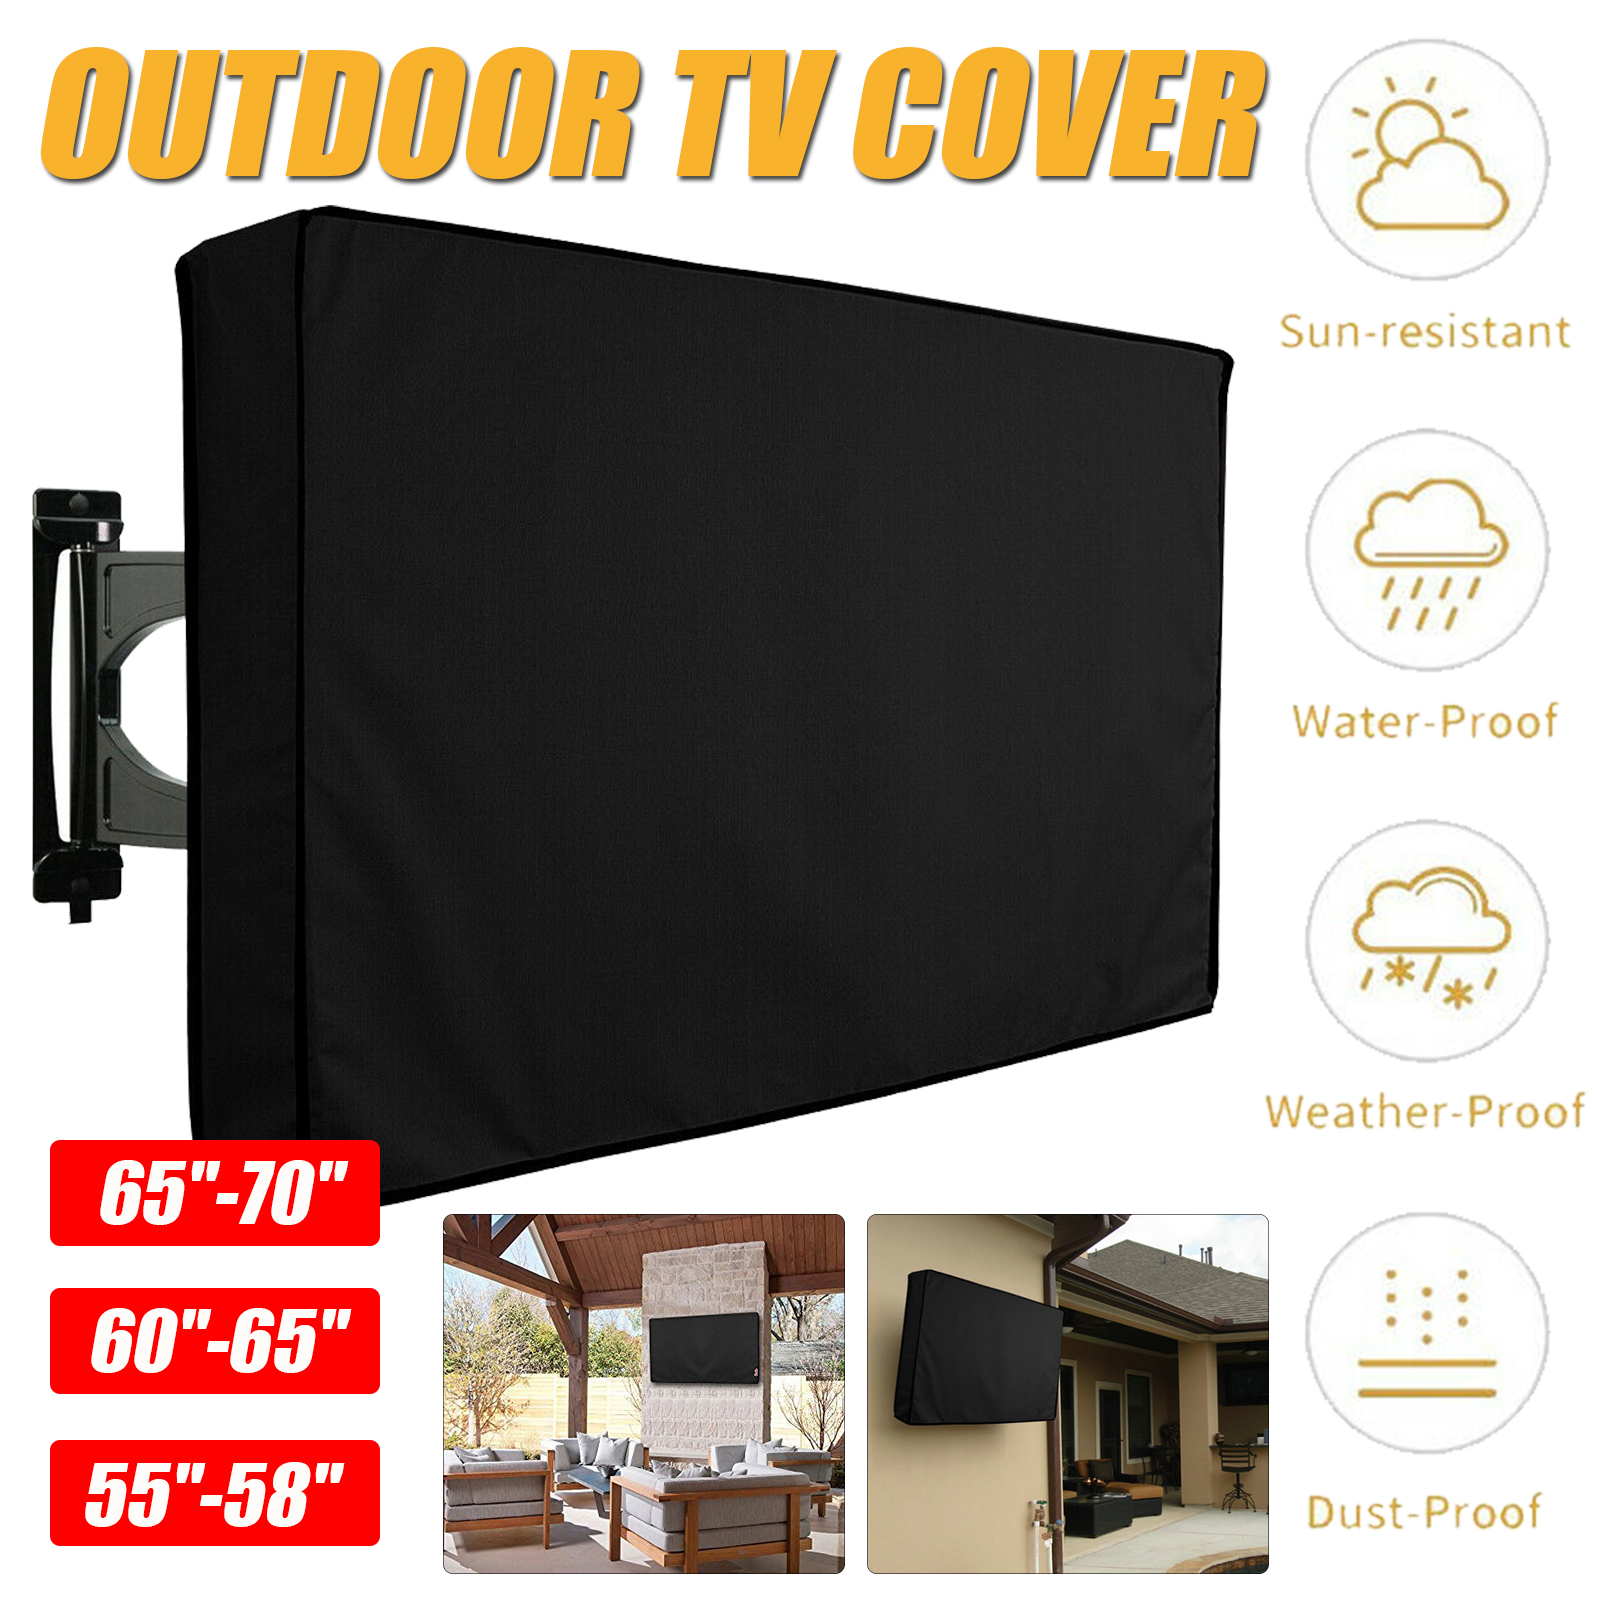 Outdoor Waterproof TV Cover Black Television Protector For 60-65 inch TV 37*58*5in